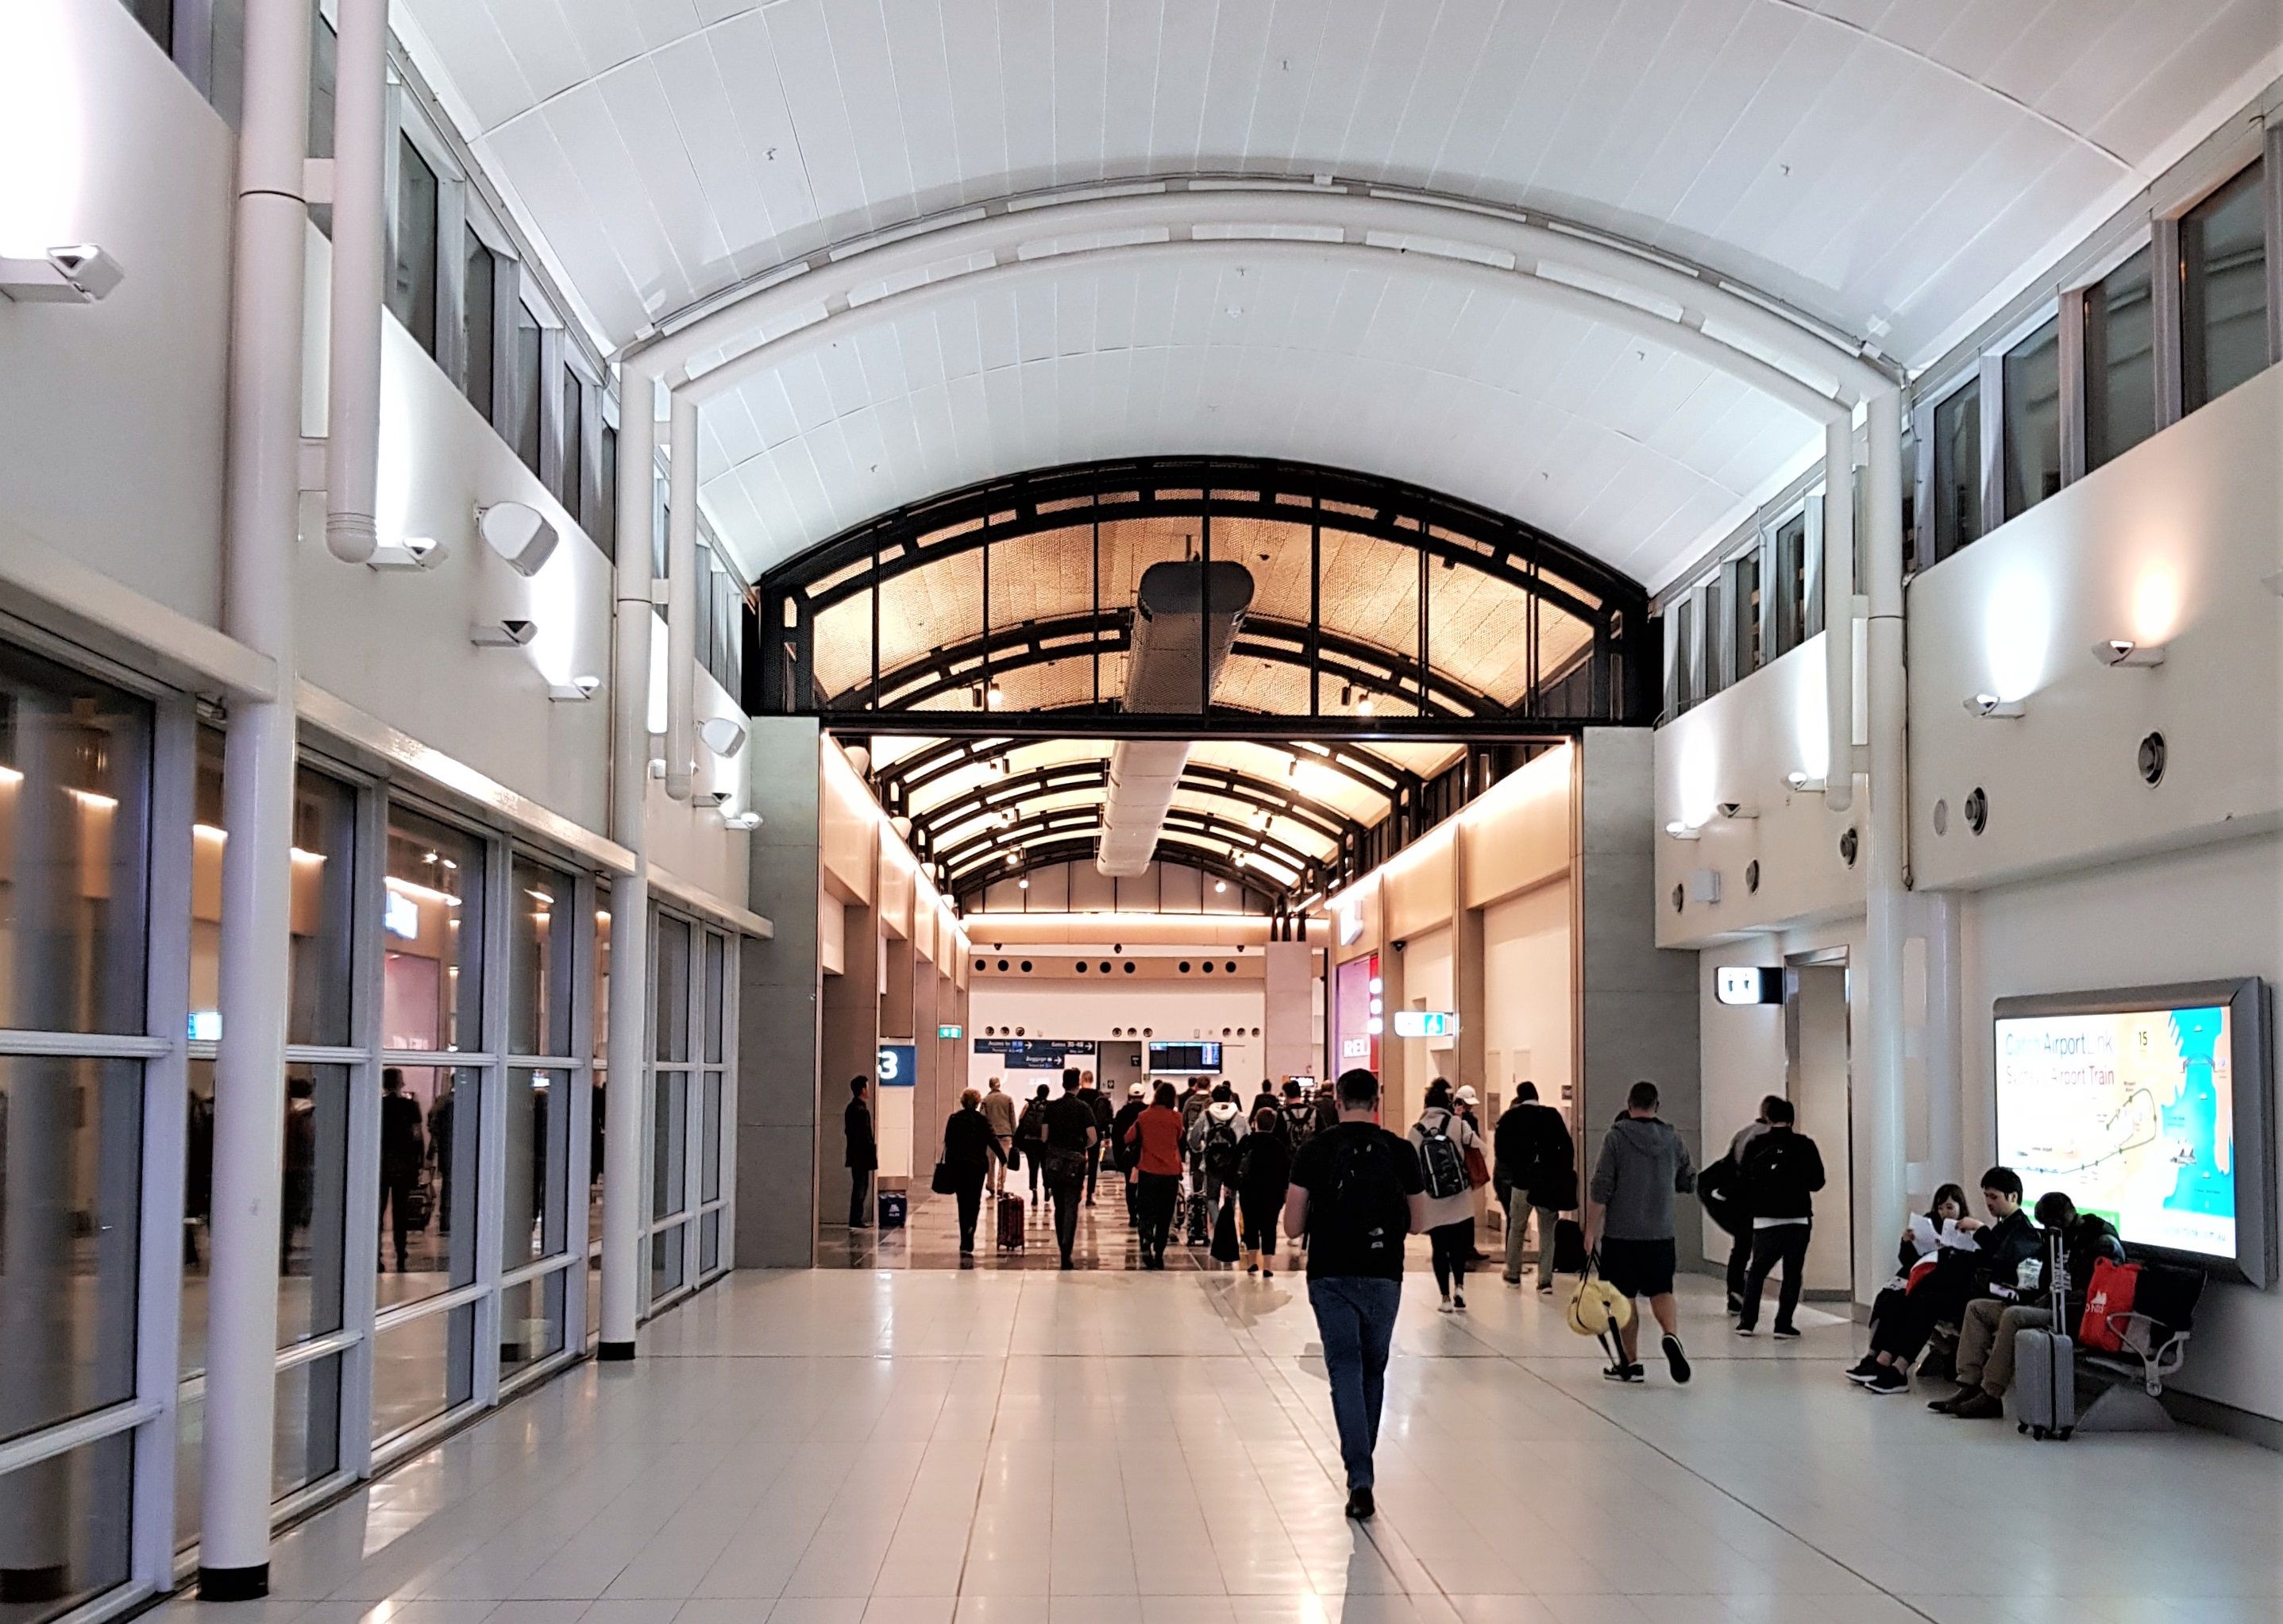 Designer look created by Amark Group's birdsmouth tile trims at Sydney T2 Terminanl